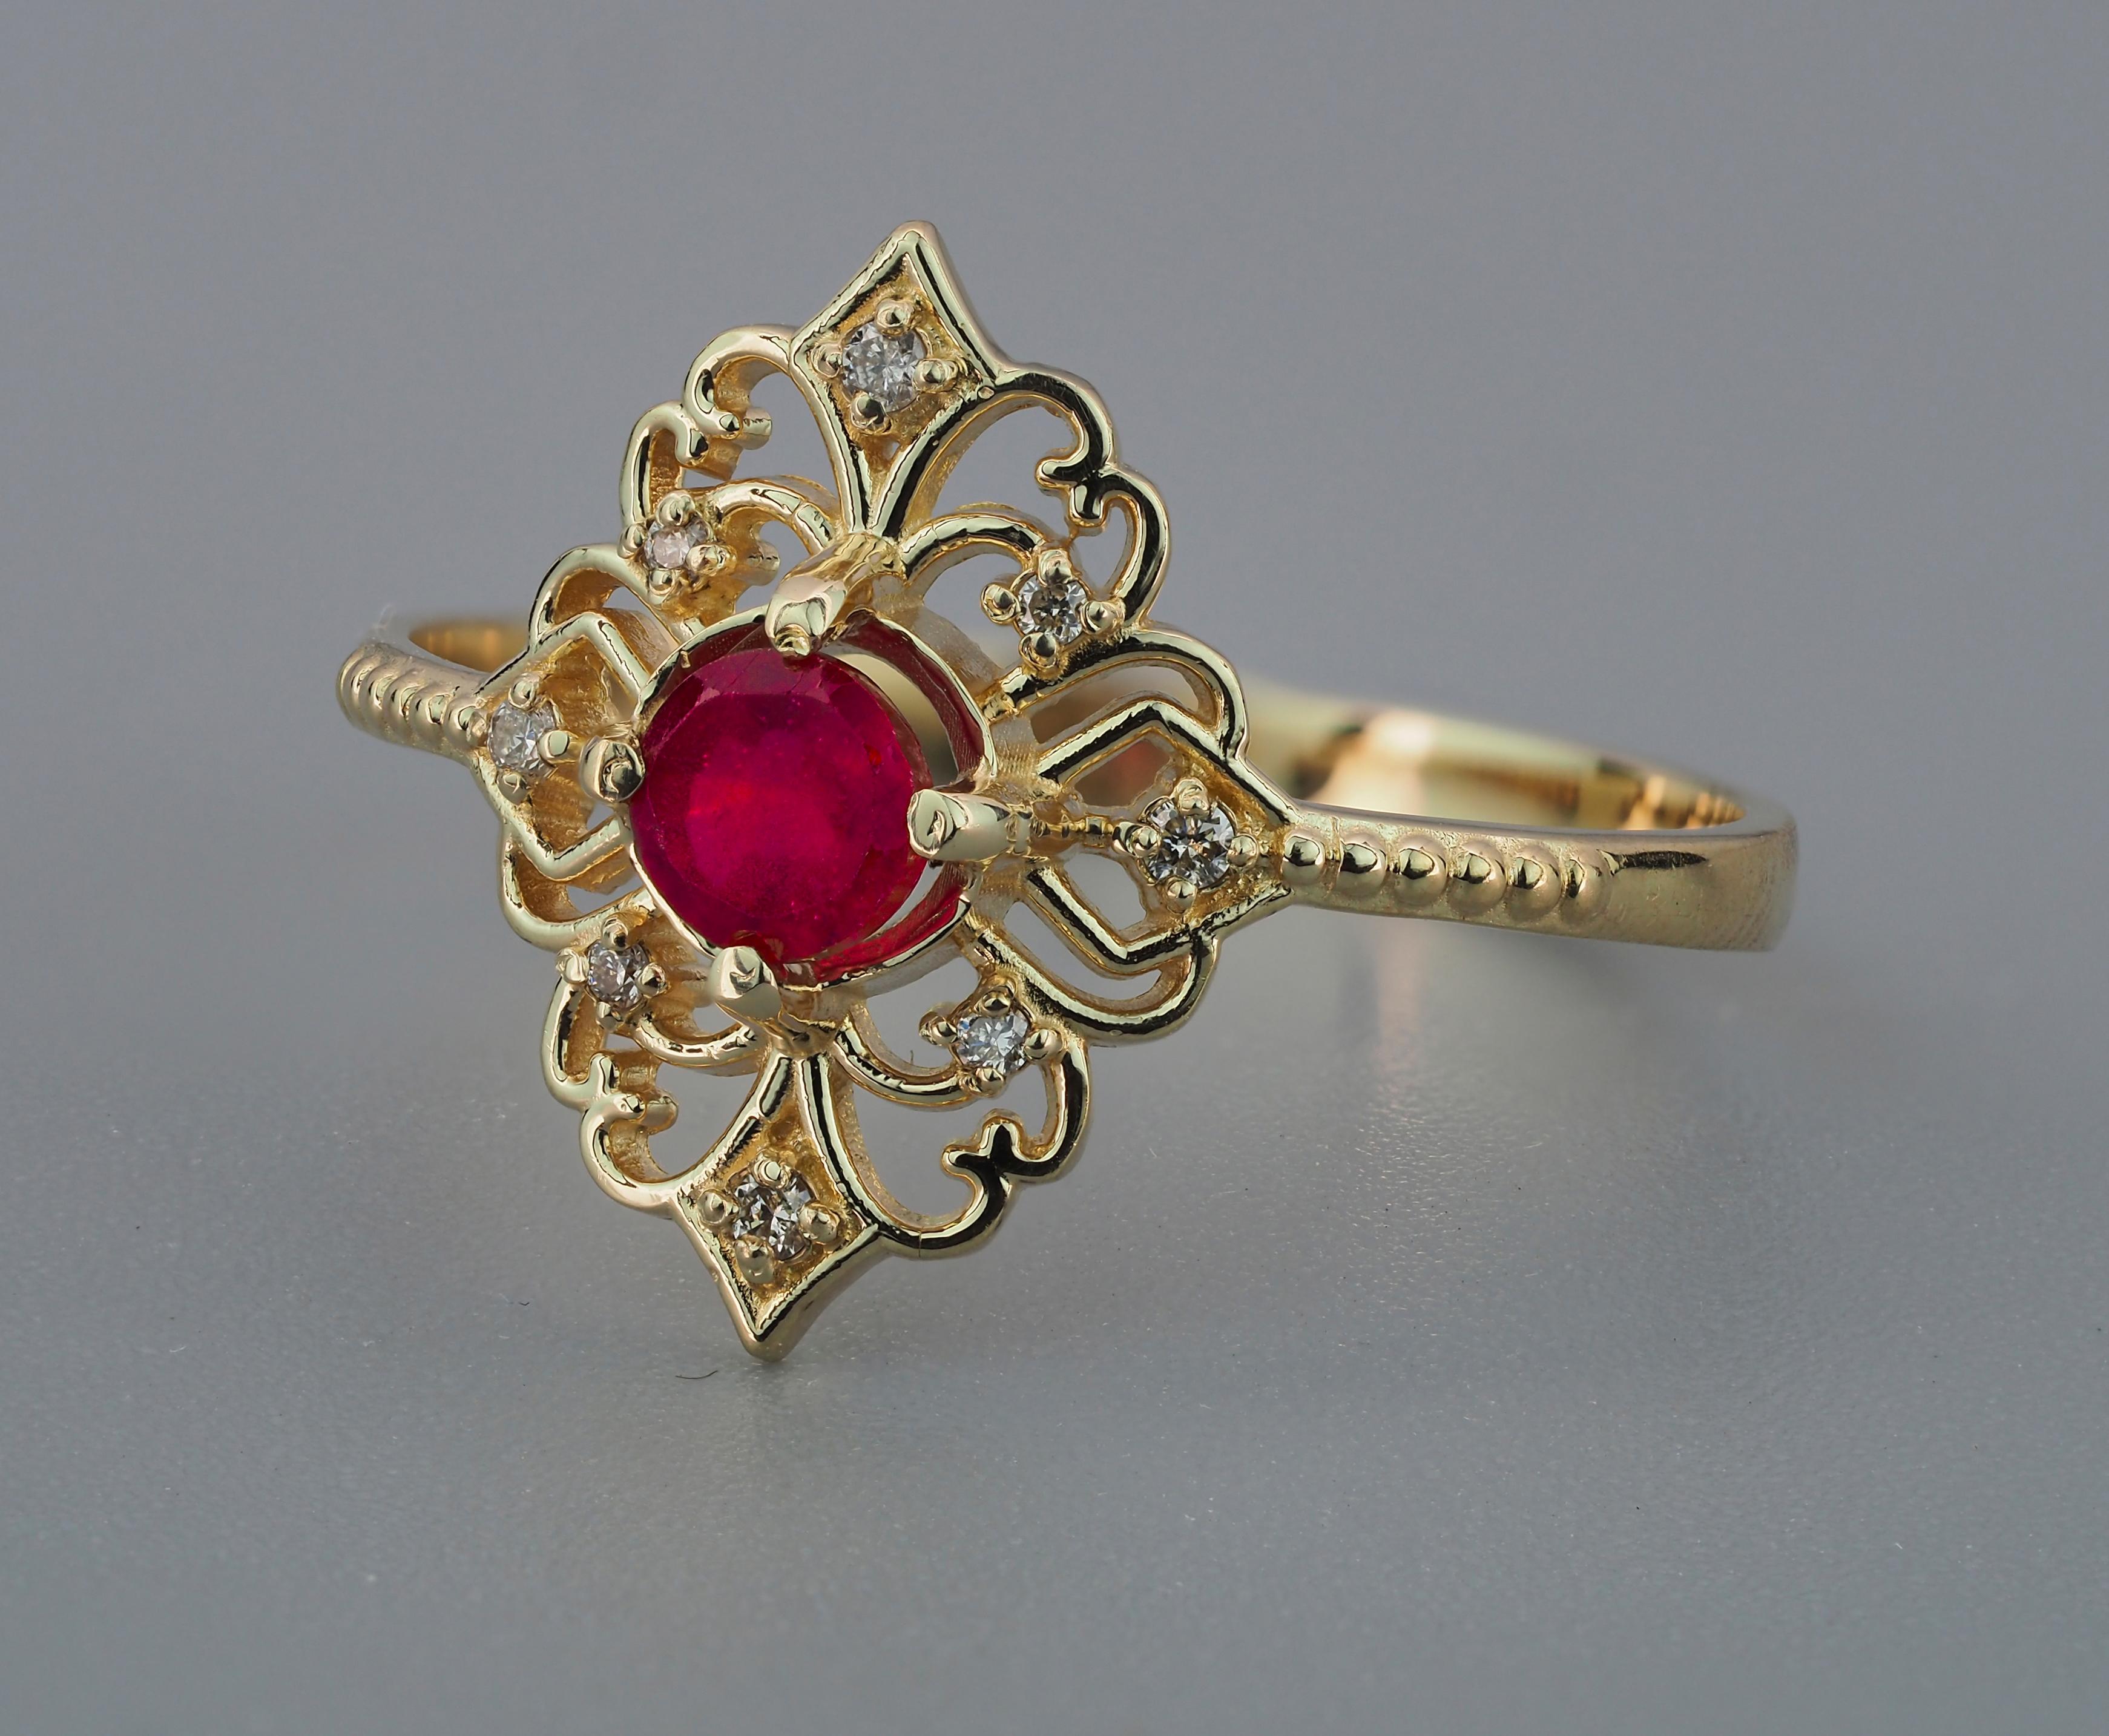 For Sale:  14 karat Gold Ring with Ruby and Diamonds. Vintage style ruby ring 4